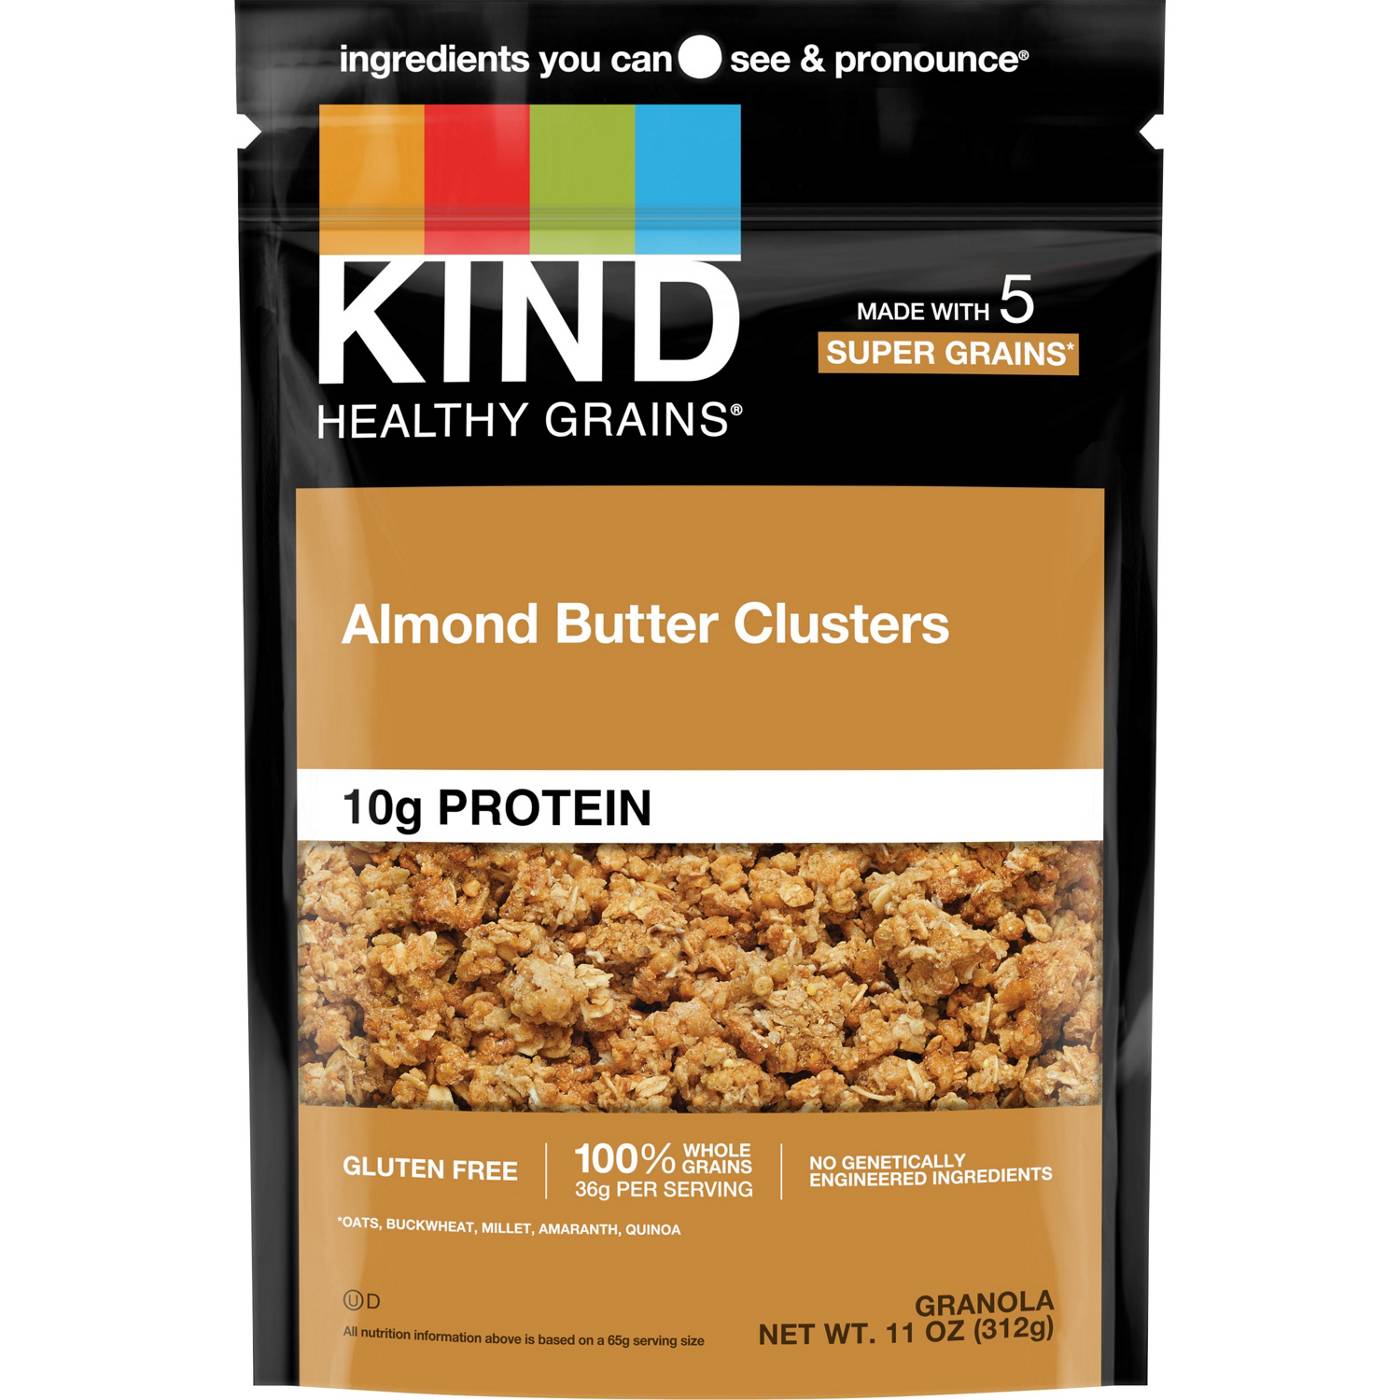 Kind Healthy Grains Granola - Almond Butter Clusters; image 1 of 2